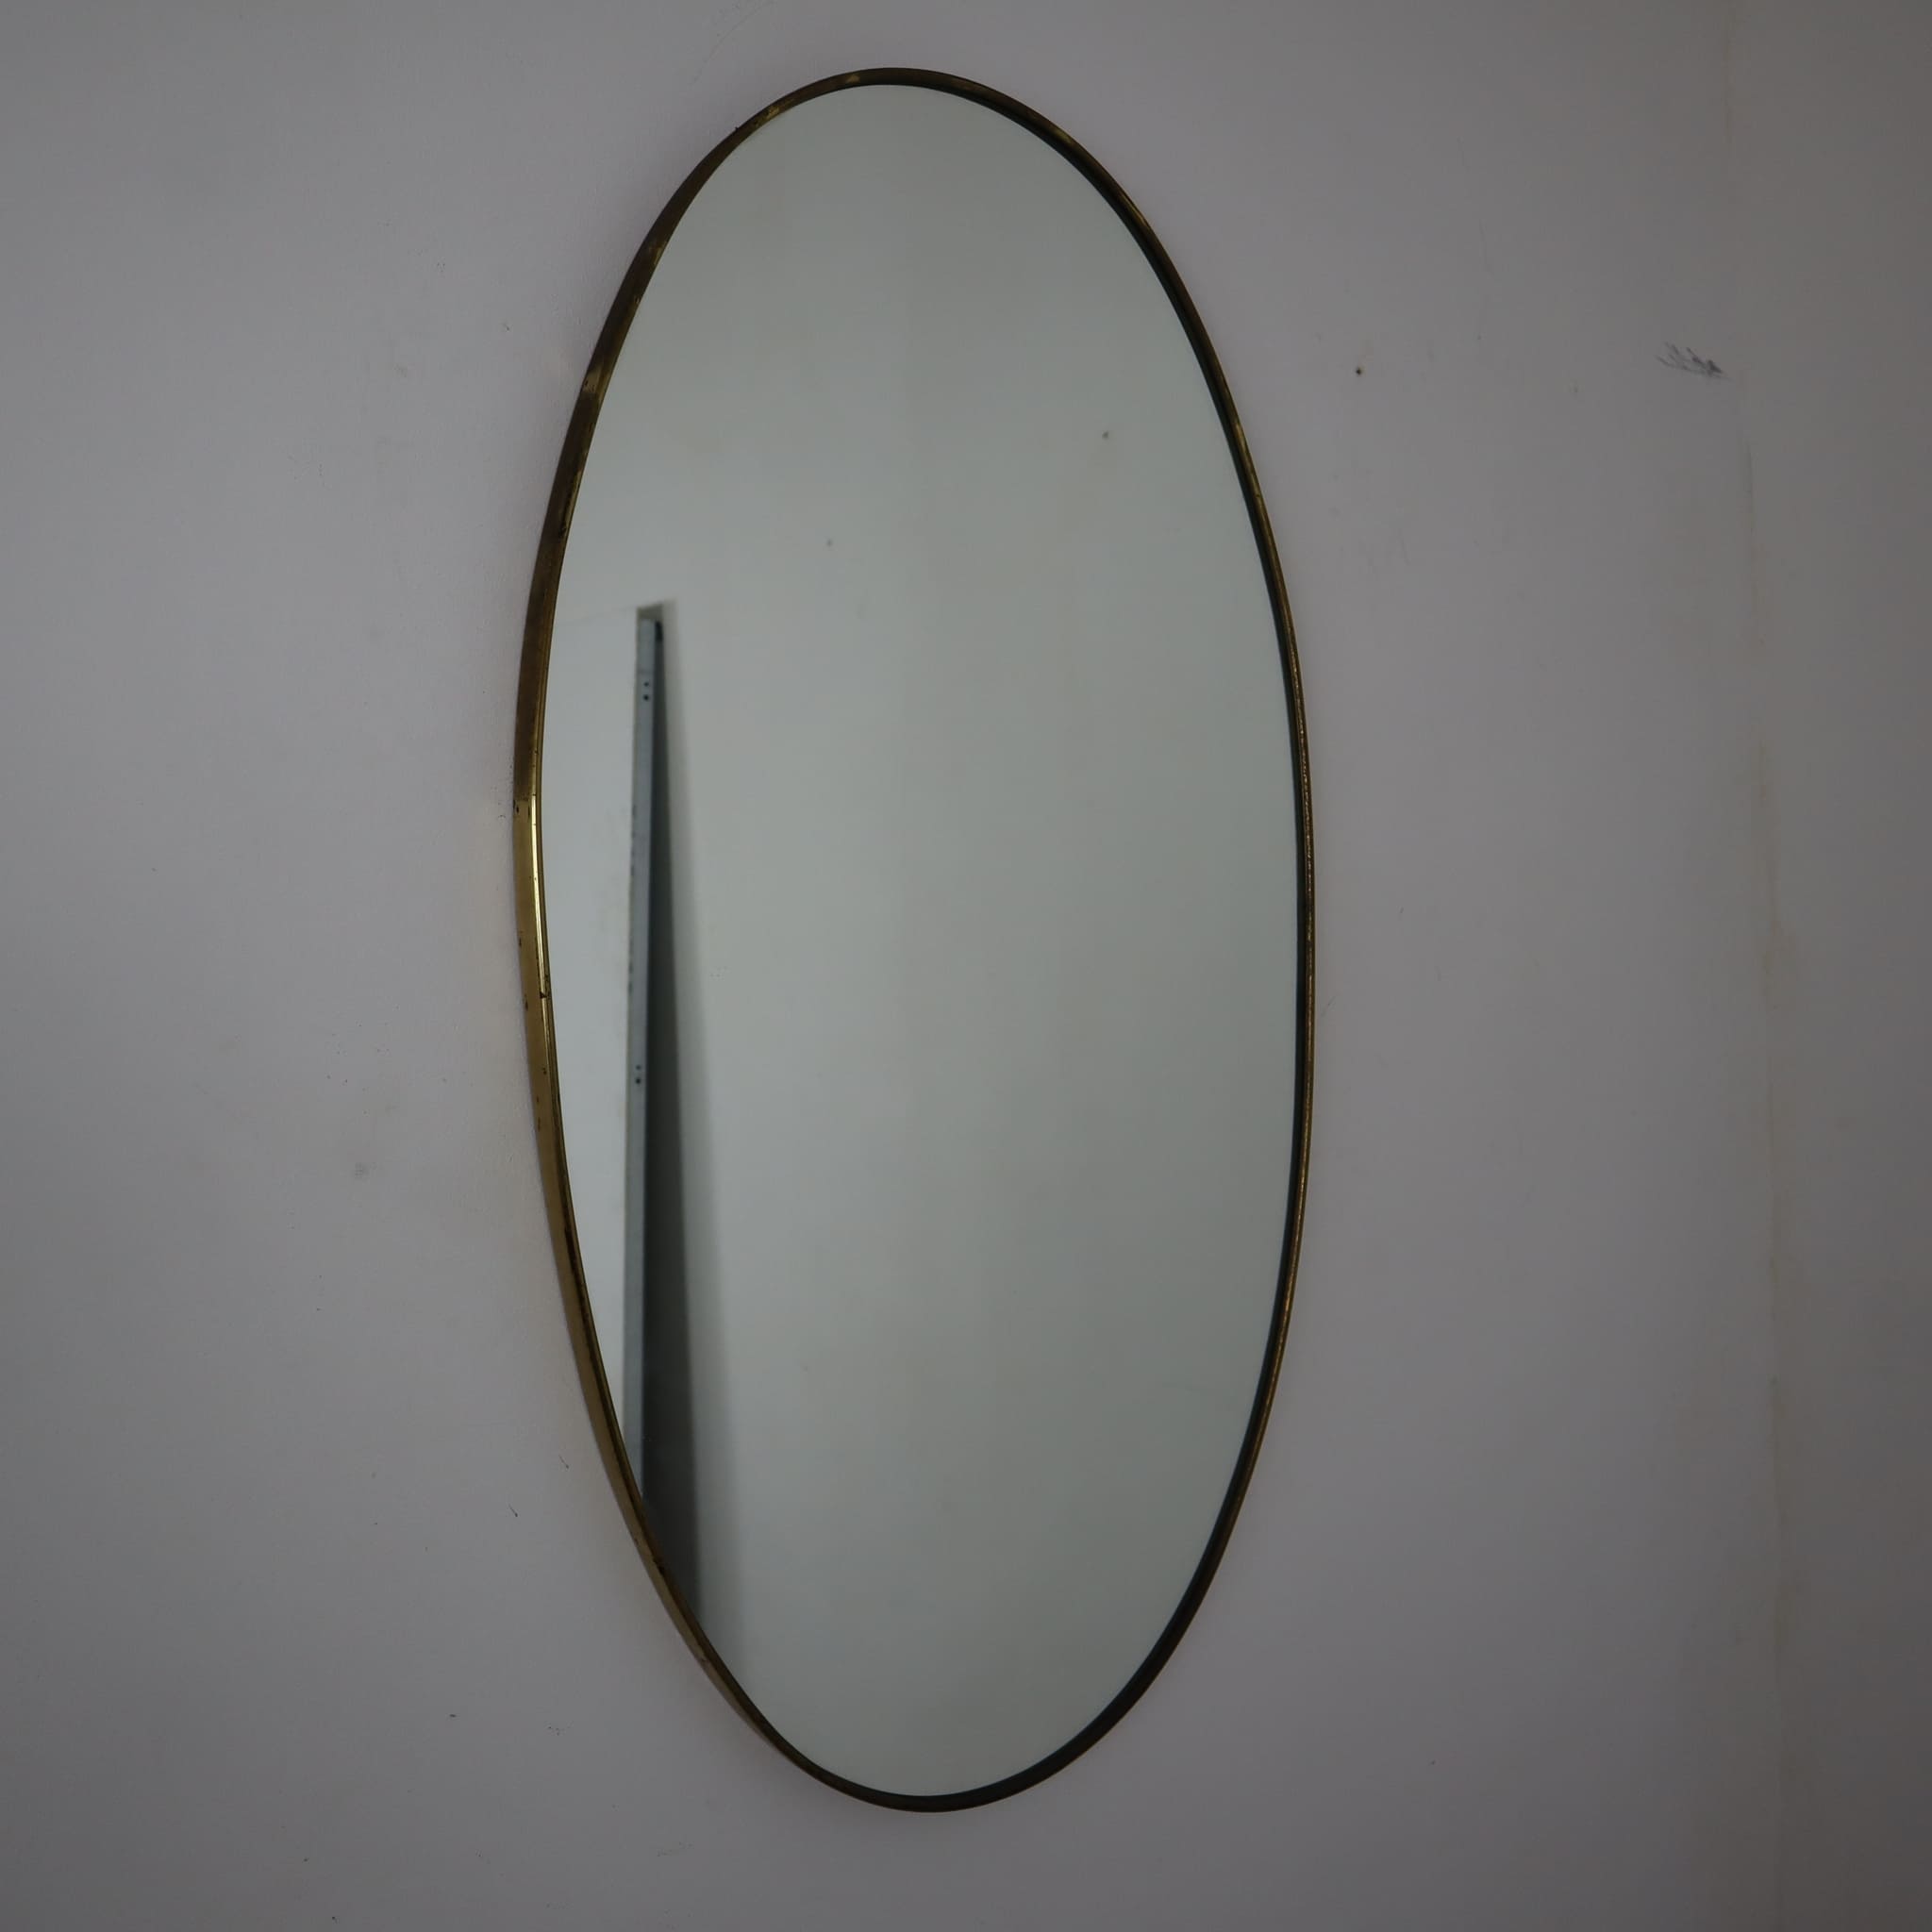 visionidepoca-modern-antique-oval-brass-mirror-1960s-vintage-made-in-italy